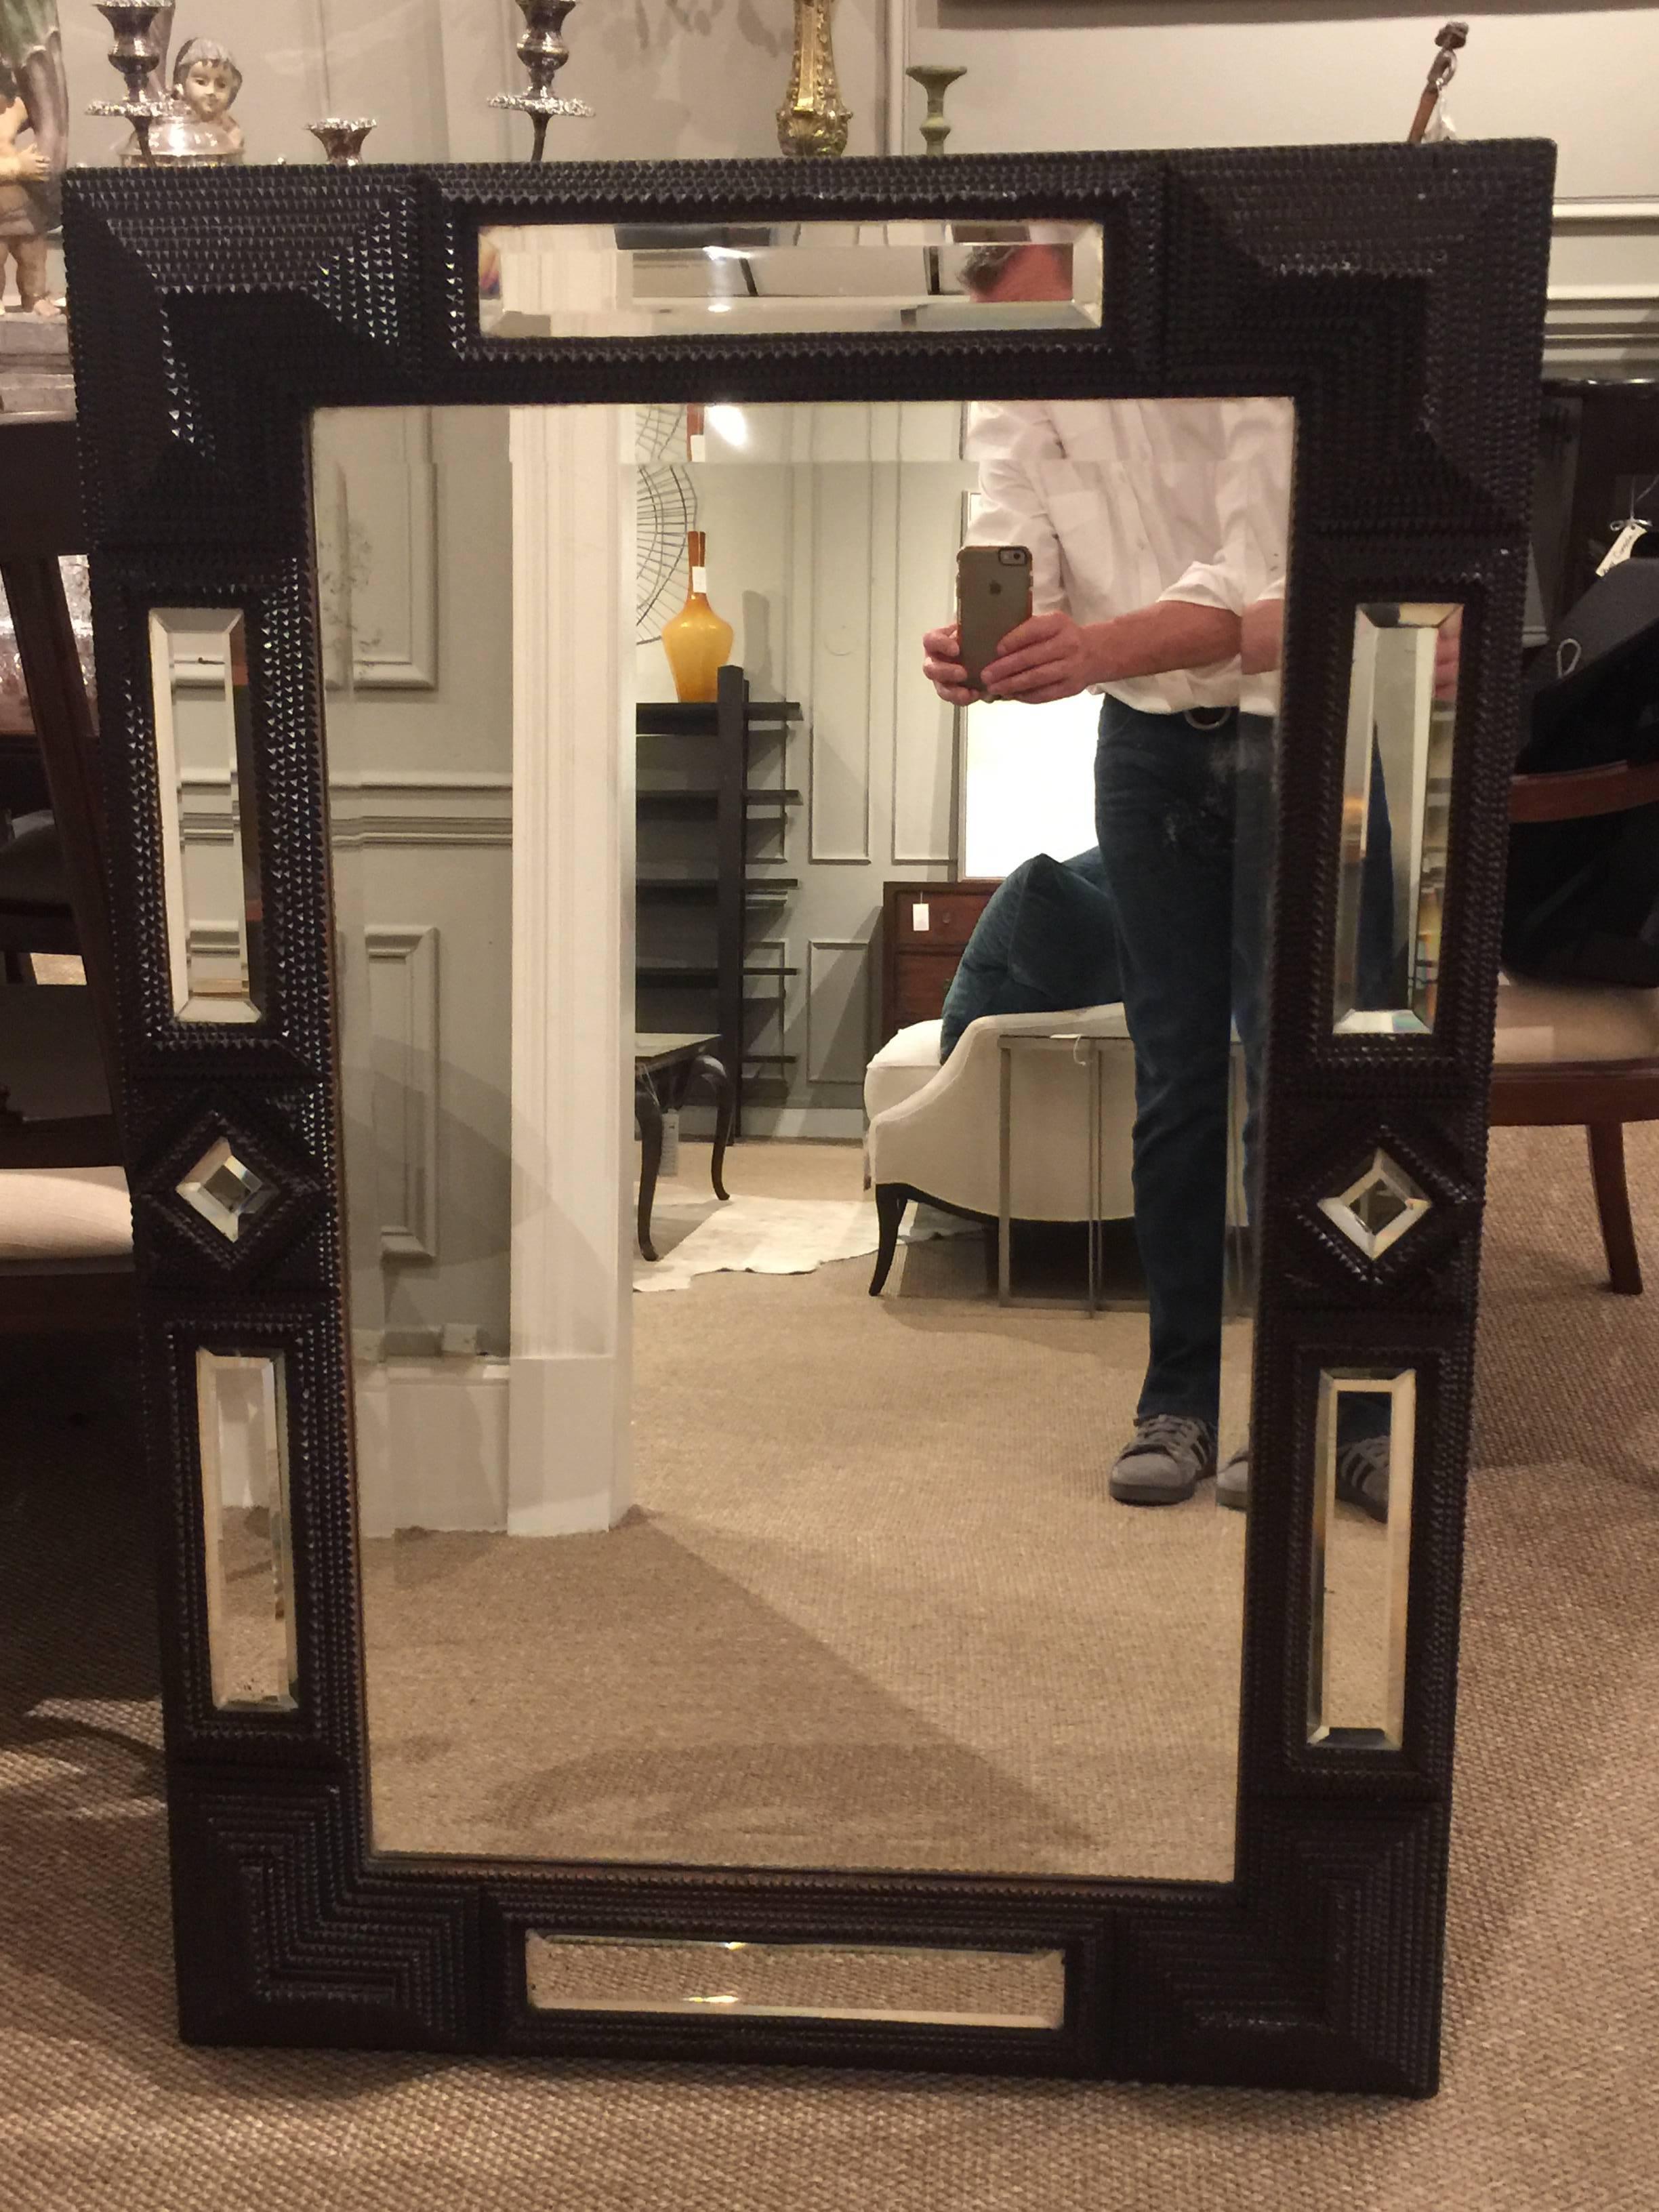 Unusual 19th century Flemish mirror, with typical pyramidal carving with alternating inset mirrored panels. The mirror has some minor oxidation.